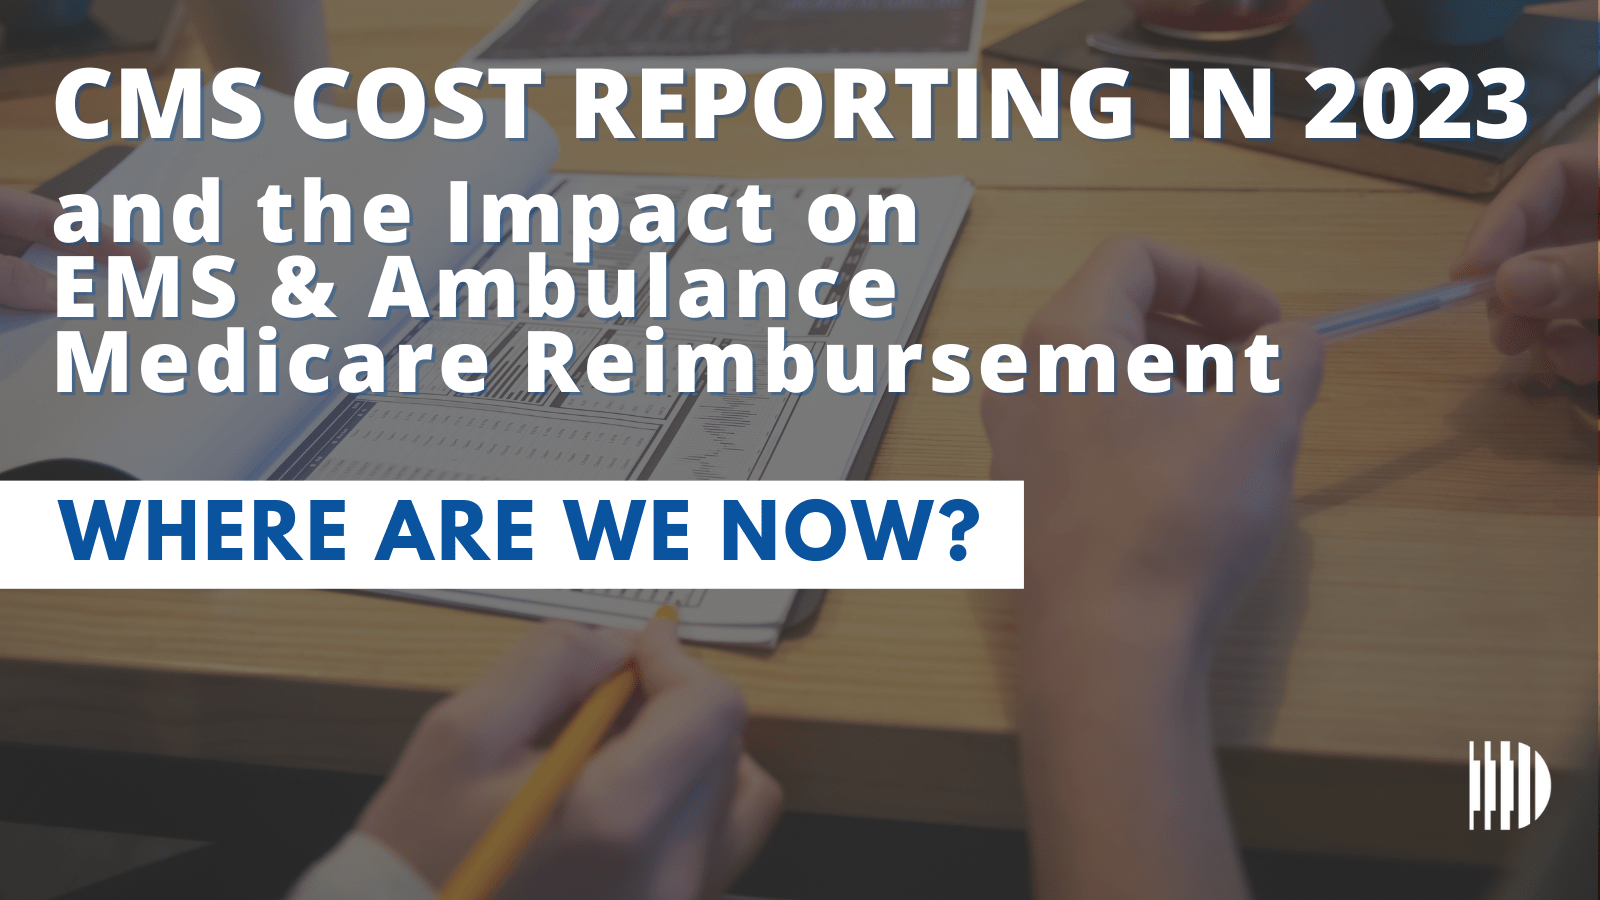 CMS Cost Reporting for EMS and Ambulance Medicare Reimbursement Where